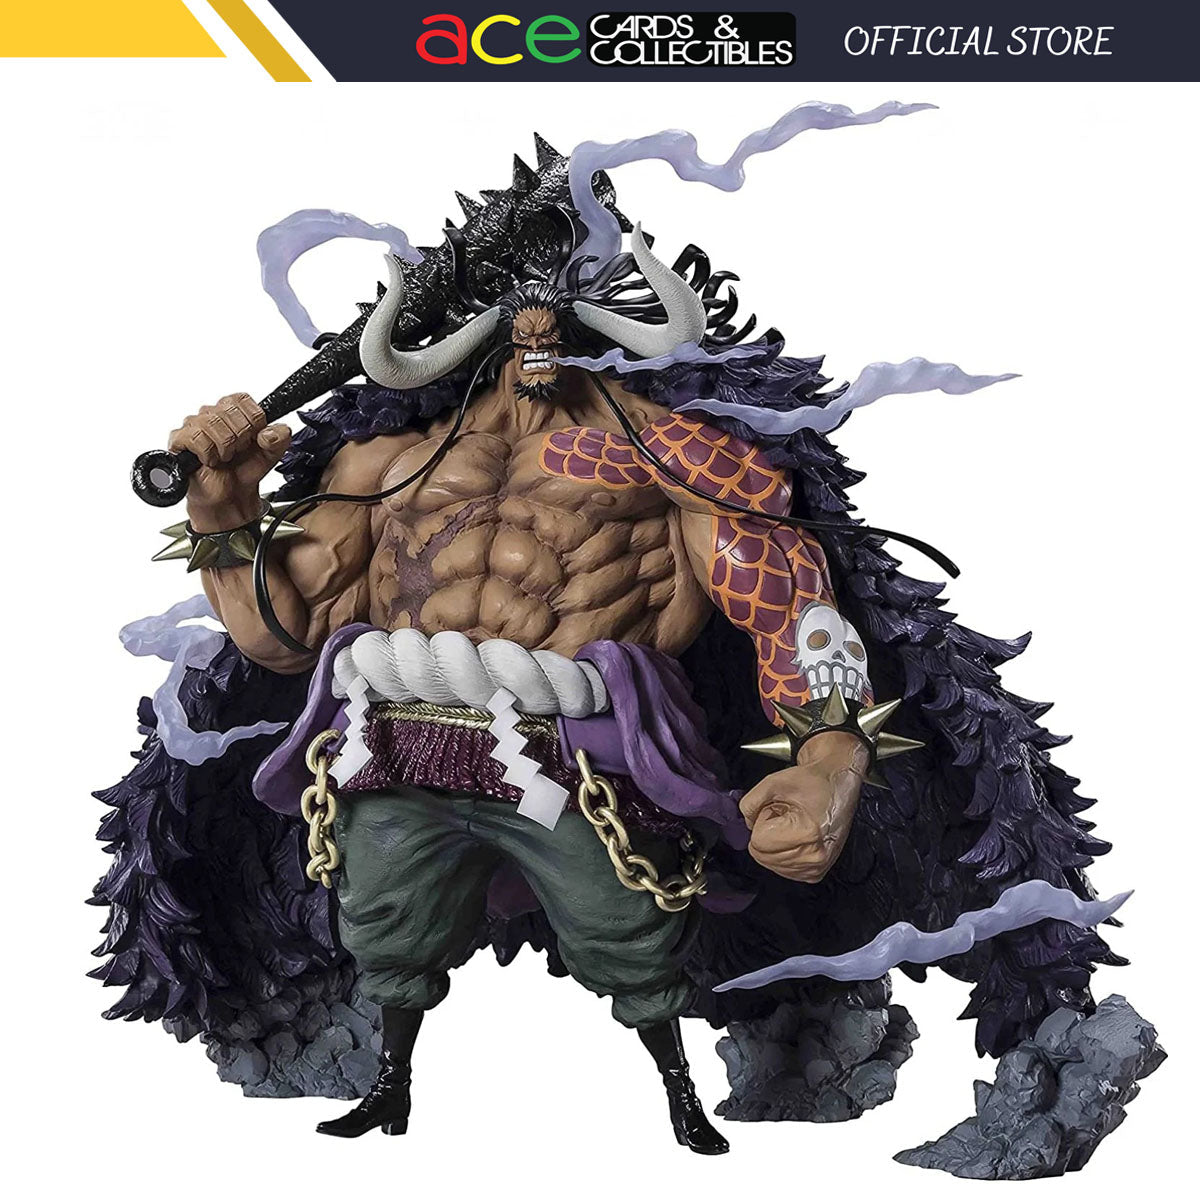 Figuarts ZERO [Extra Battle] One Piece "Kaido" -King of the Beast-Bandai-Ace Cards & Collectibles